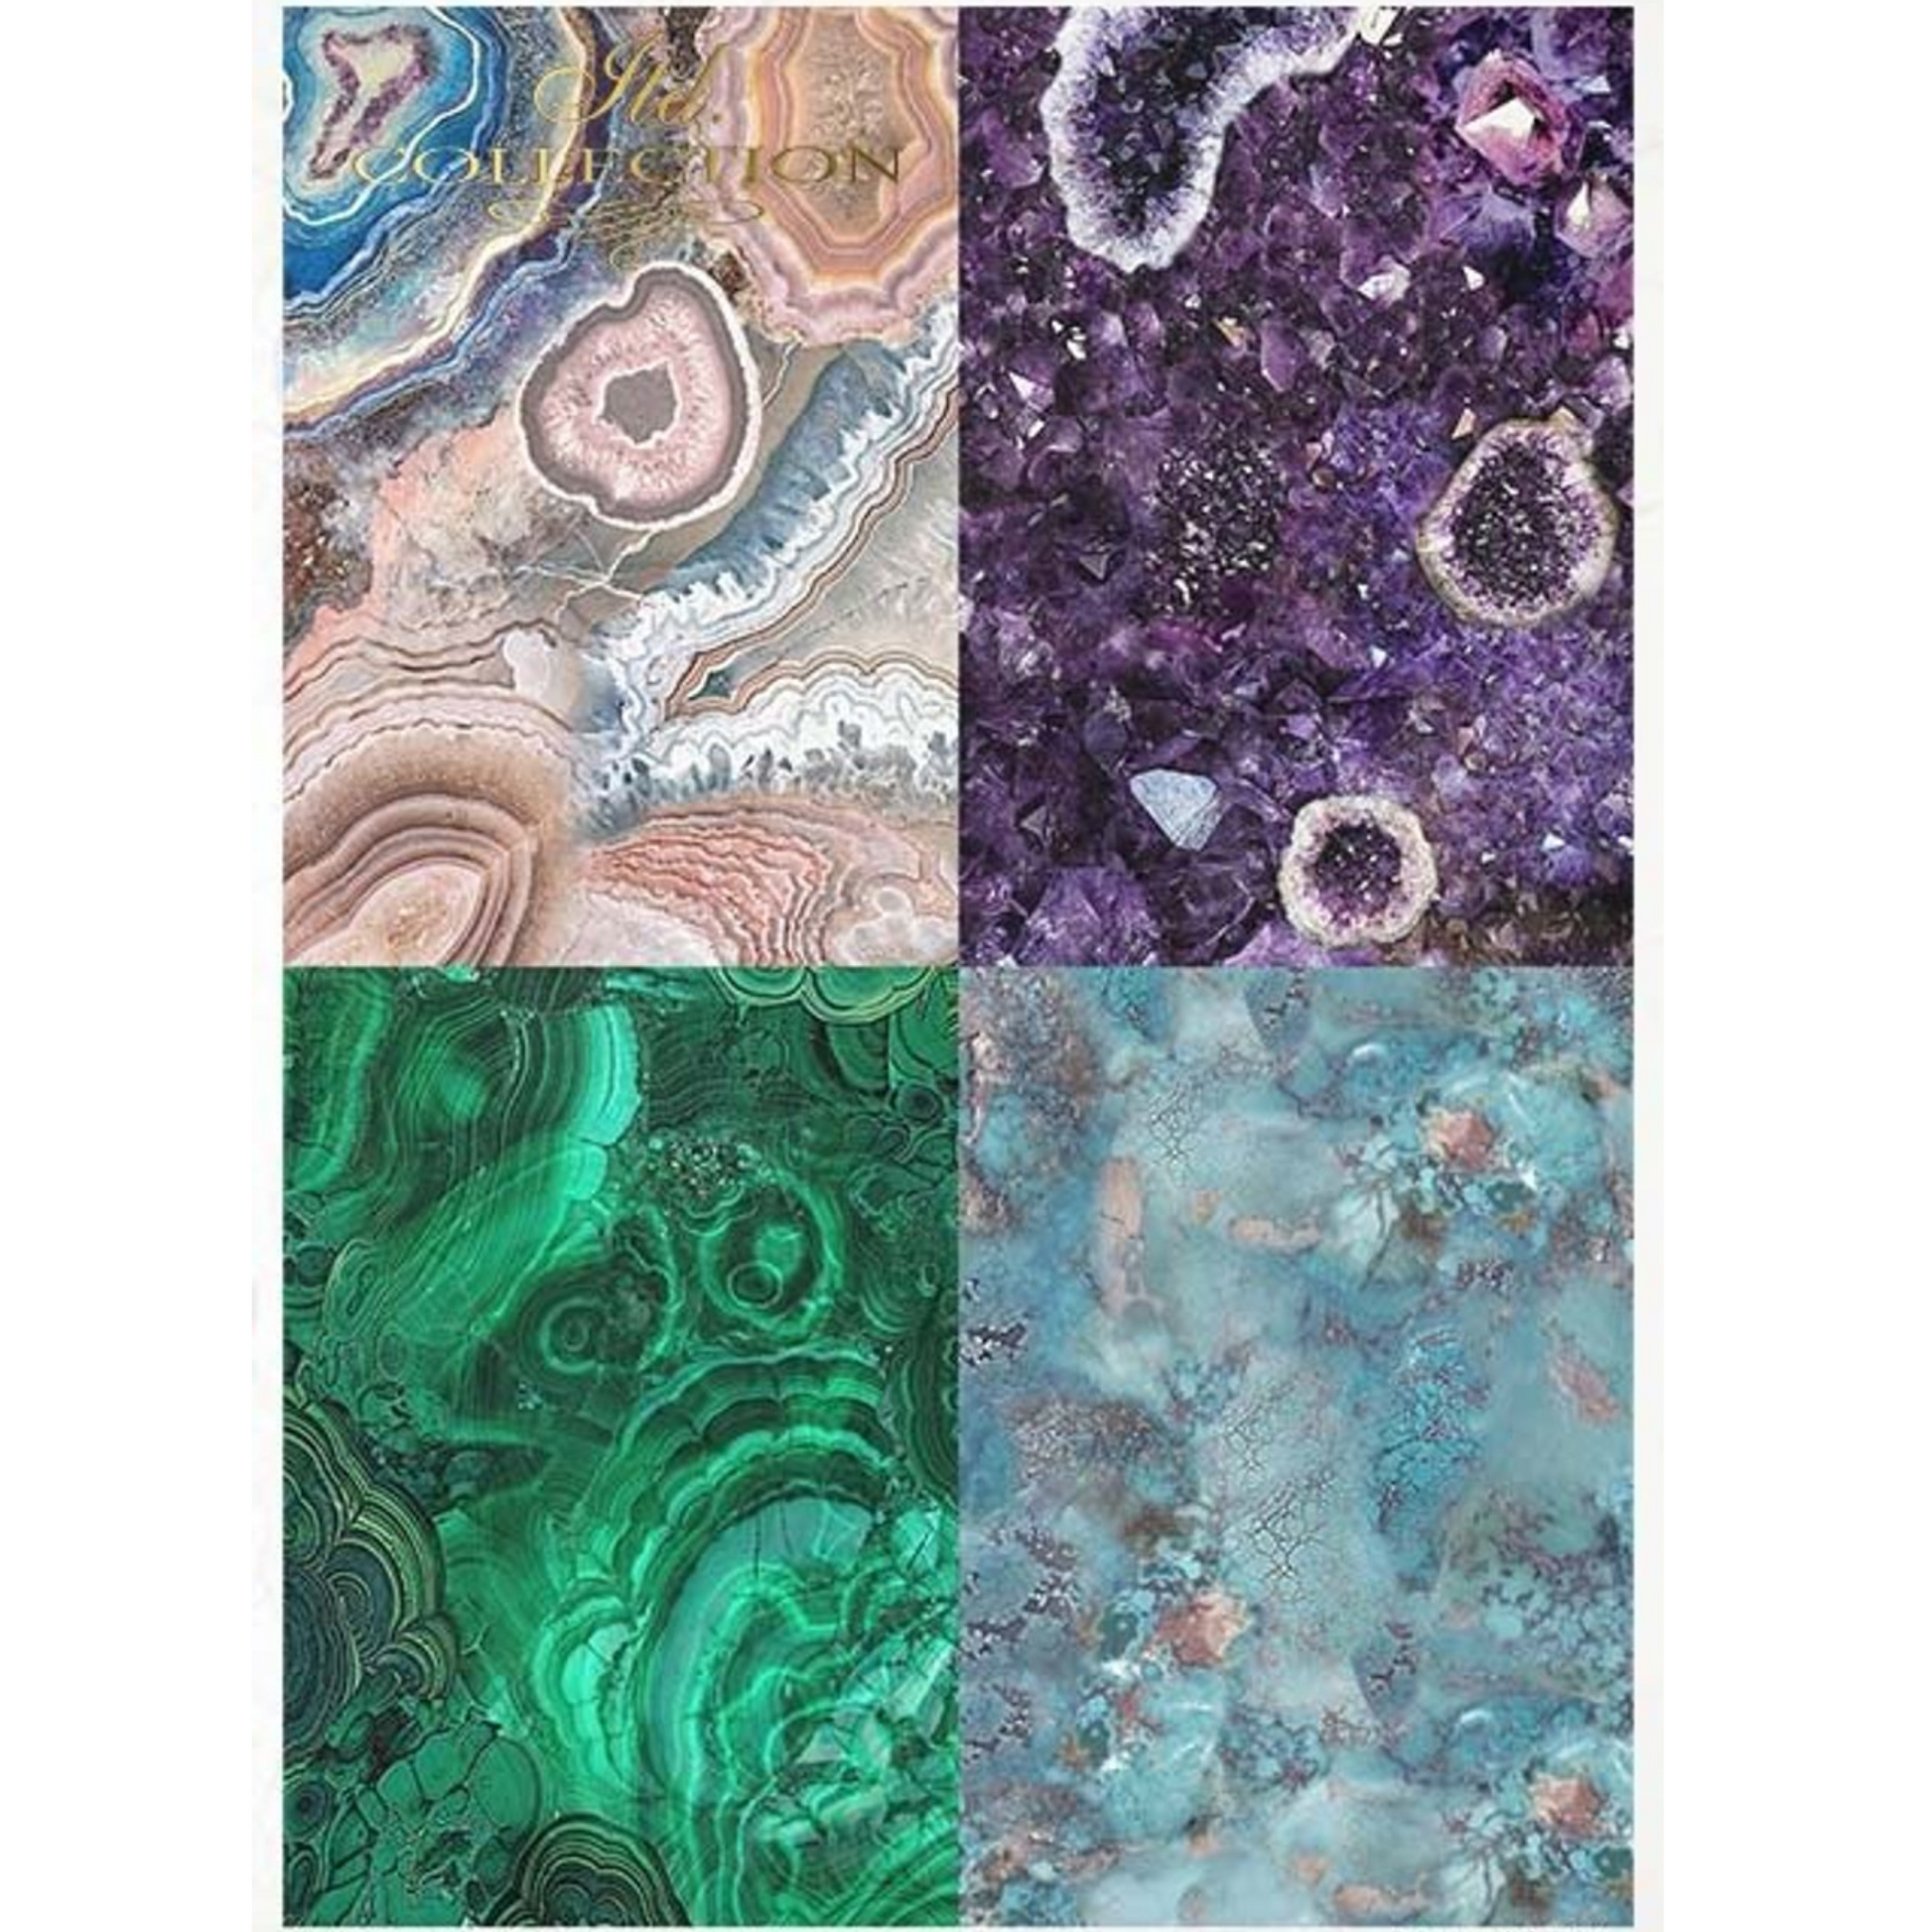 "Gemstones" decoupage rice paper 11 sheet set in size A4 available at Milton's Daughter. Page 1 of 11 sheet set.